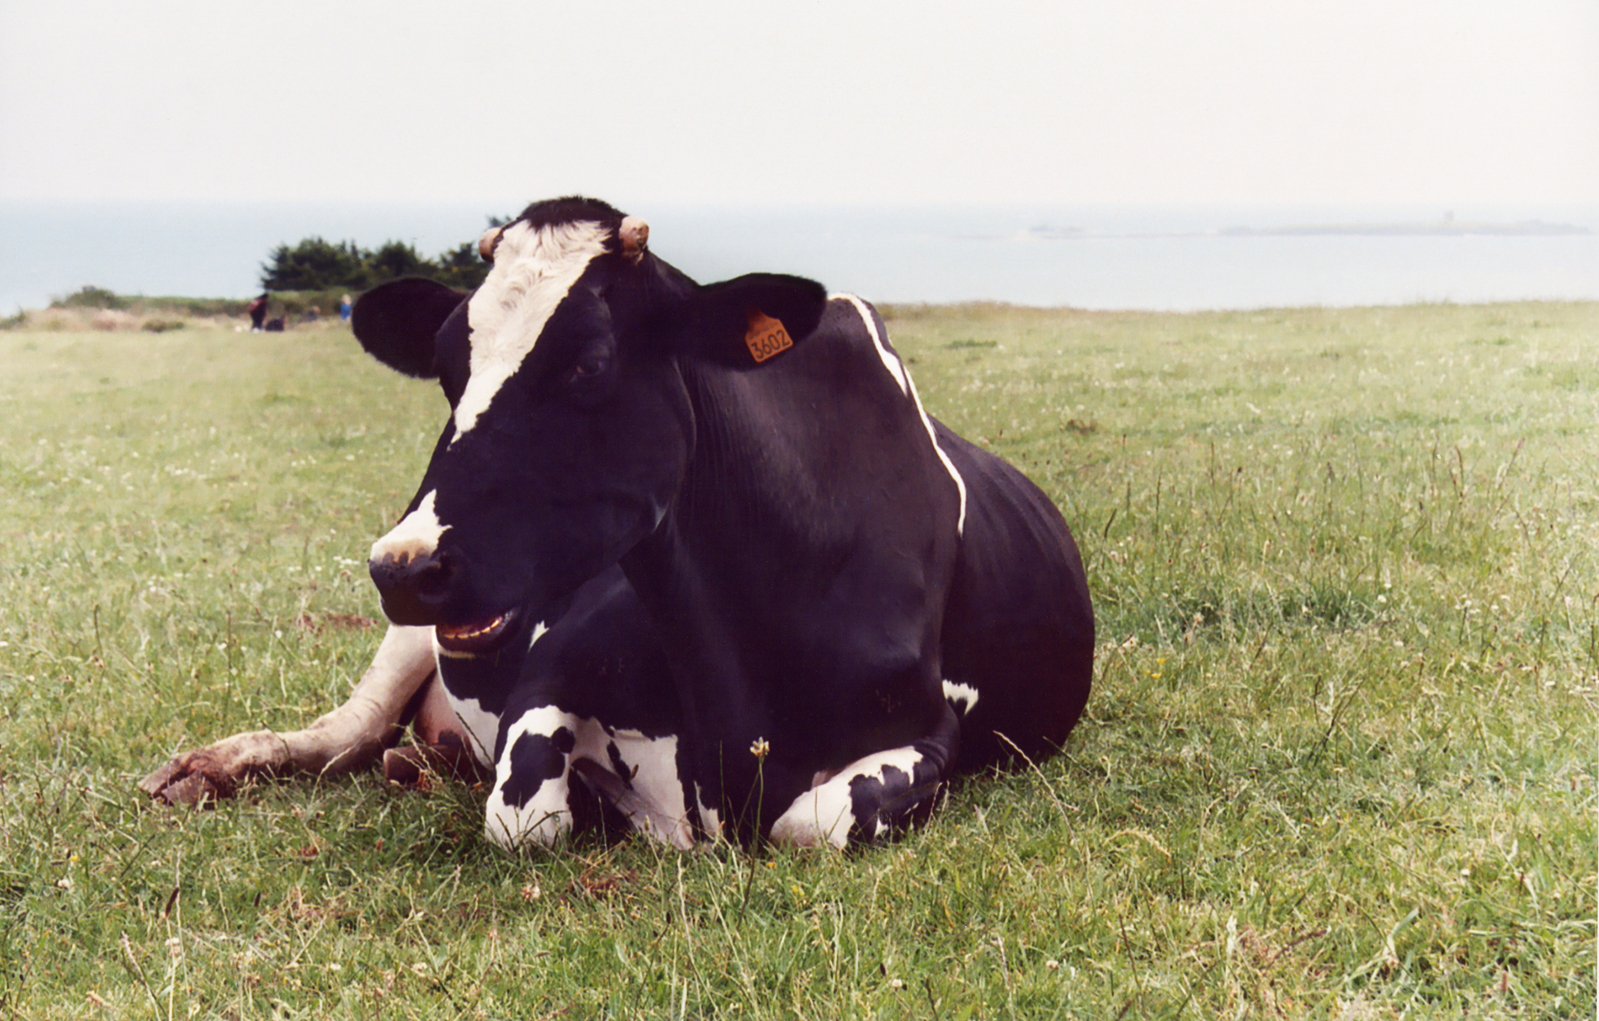 a cow is resting and enjoying it's day in the sun